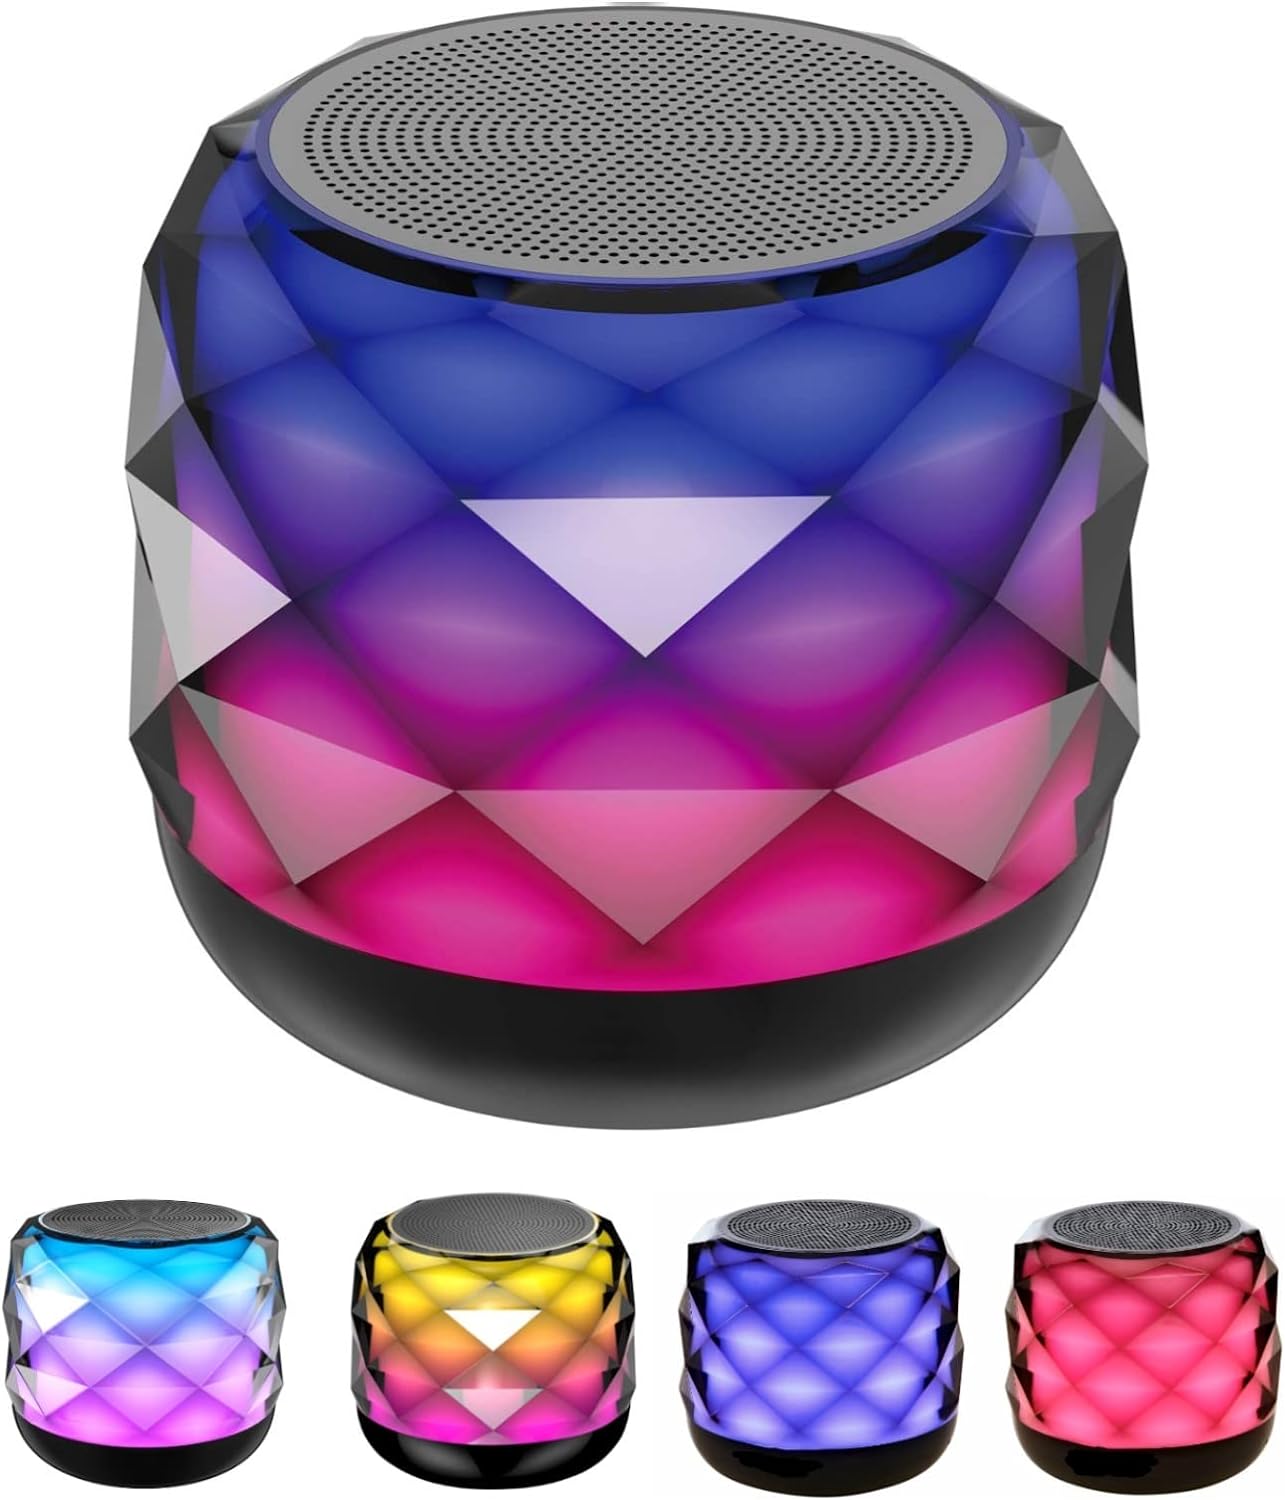 LENRUE Bluetooth Speaker, Small Mini Wireless Portable Speakers with Colorful Light, HiFi Sound, Long Playtime,Gift for Women Girls Kids Daughter Sister